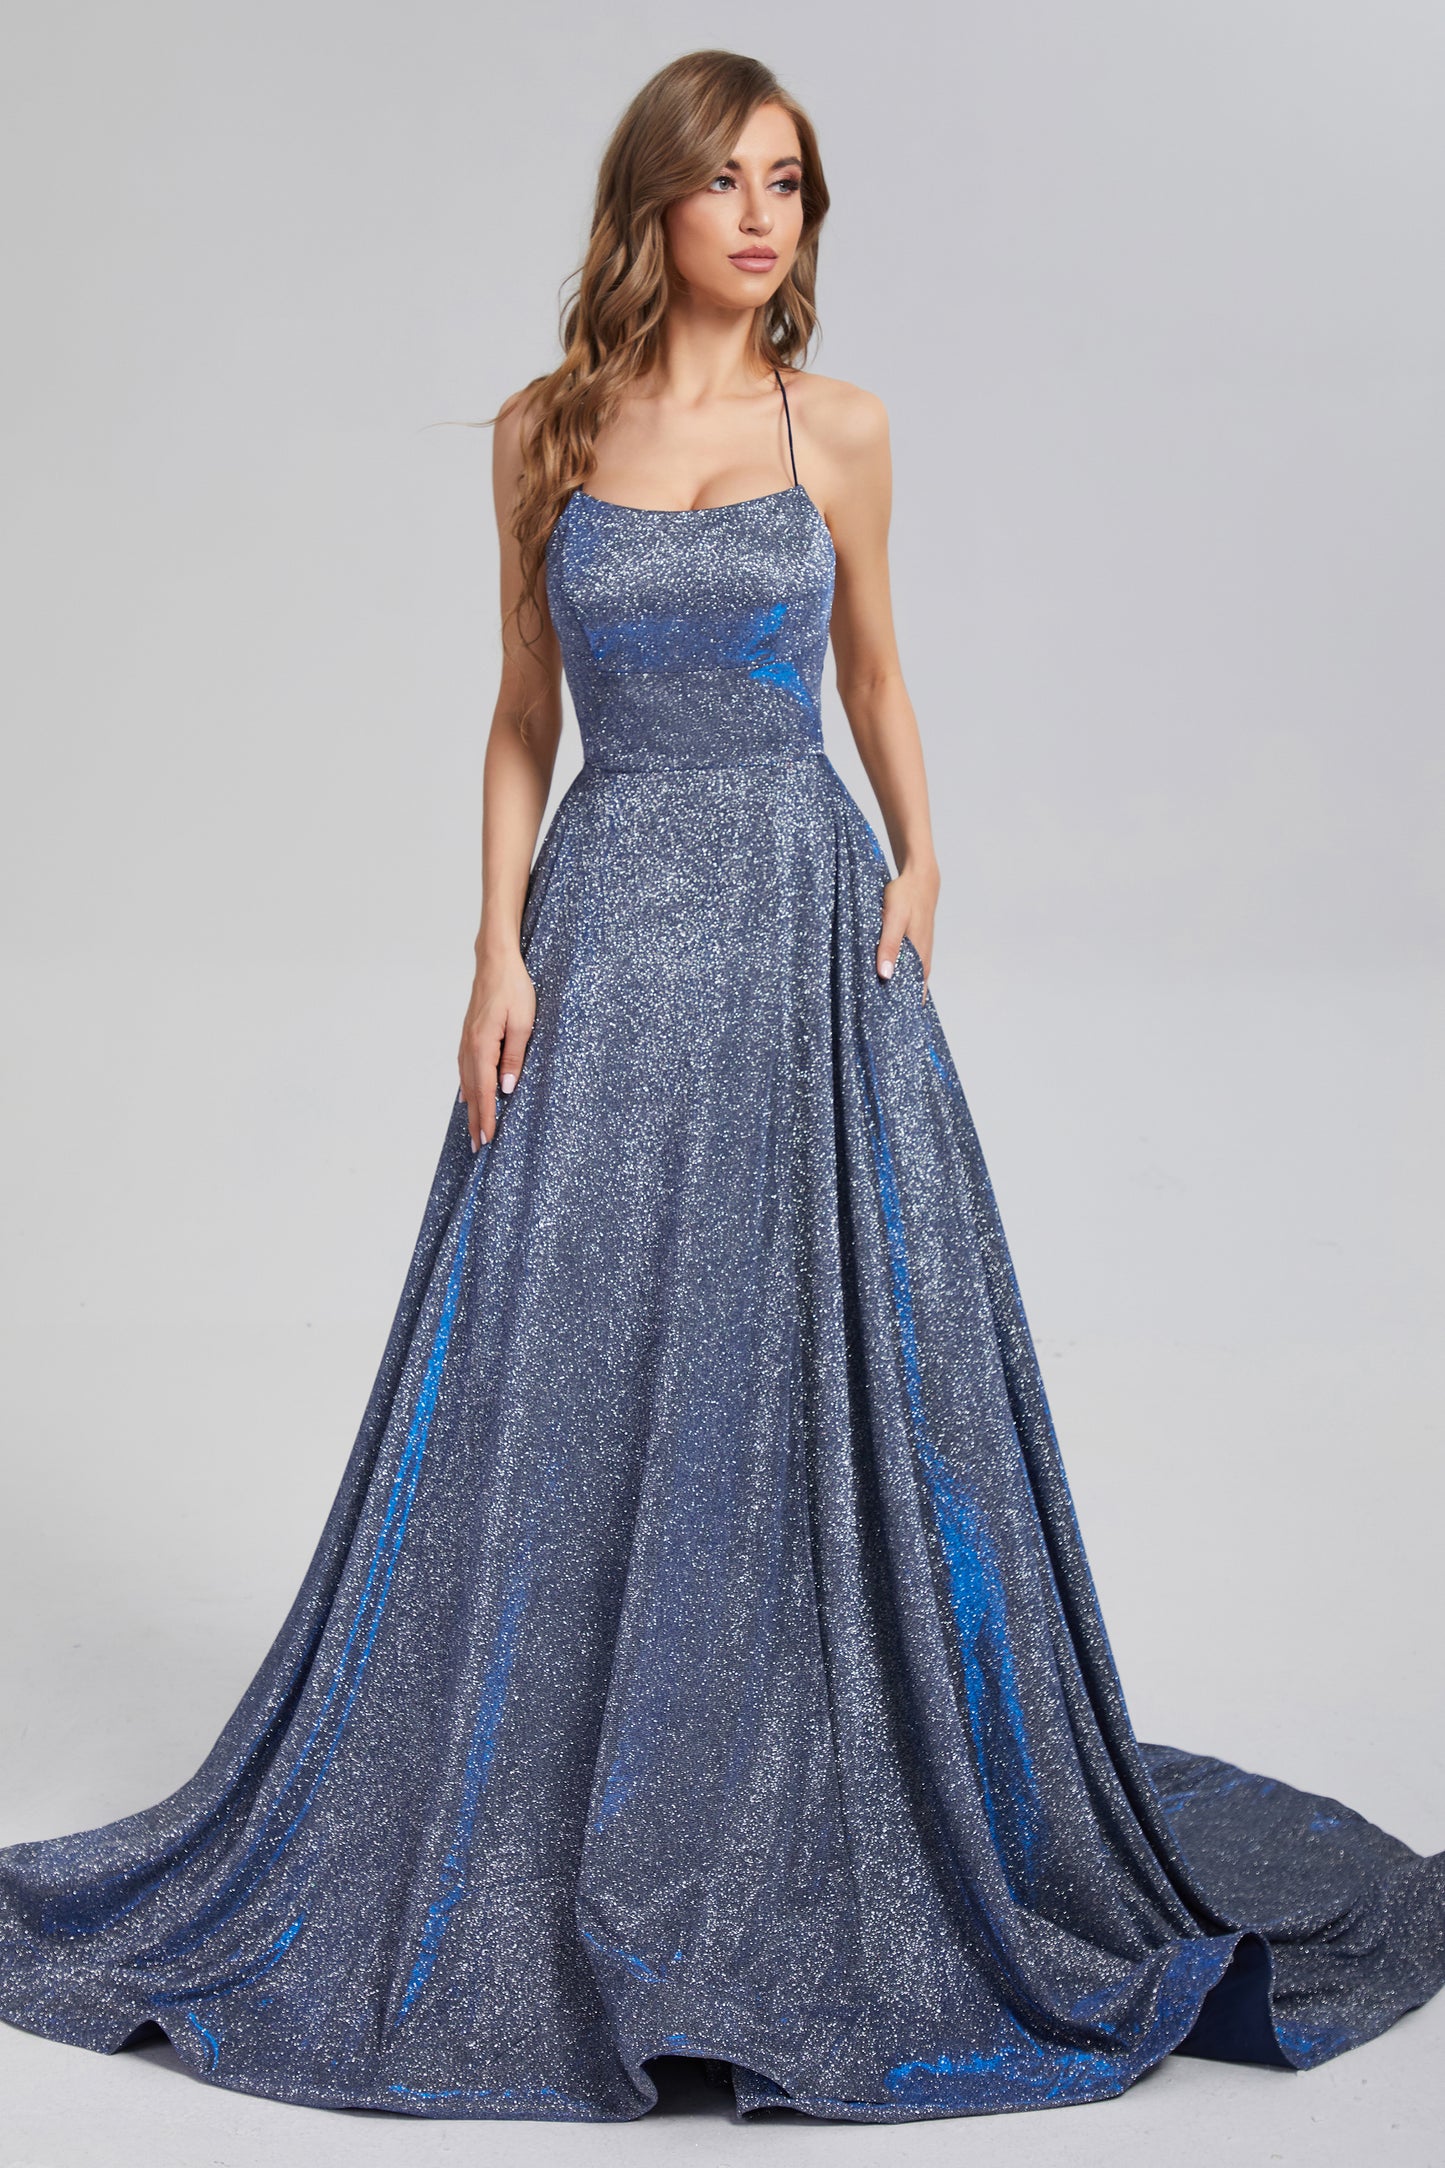 Sparkly Criss Cross Prom Dresses with Trailing